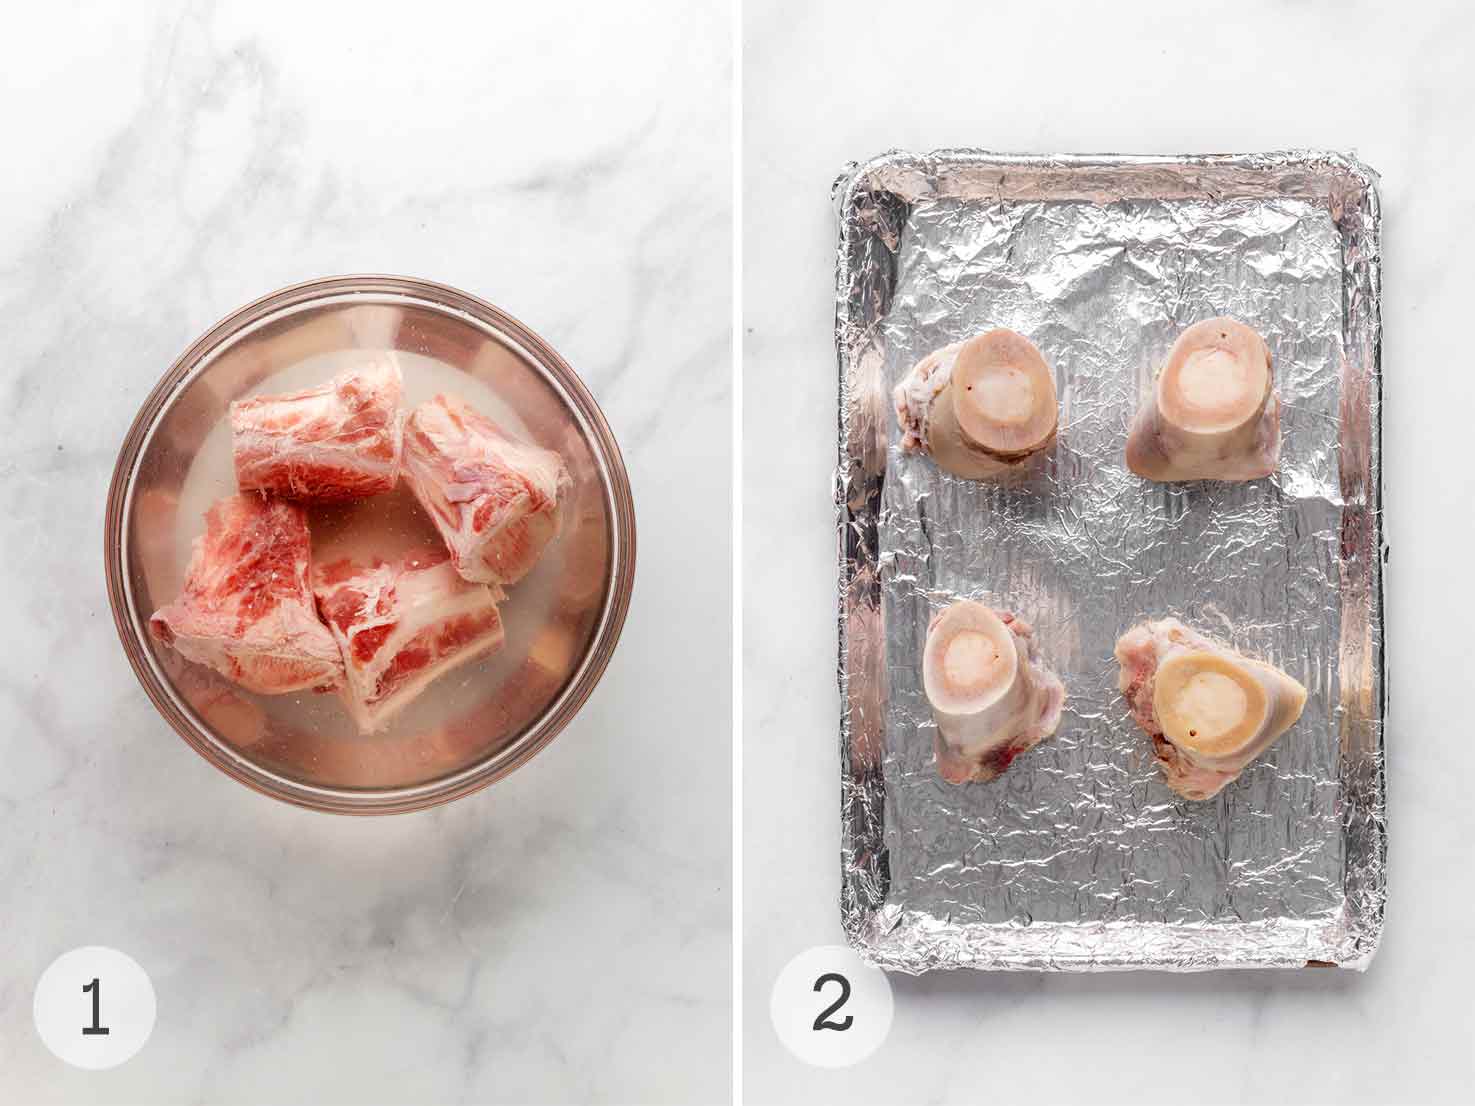 Bone marrow soaking in a bowl of salt water, and four pieces of bone marrow on a foil-covered baking sheet.